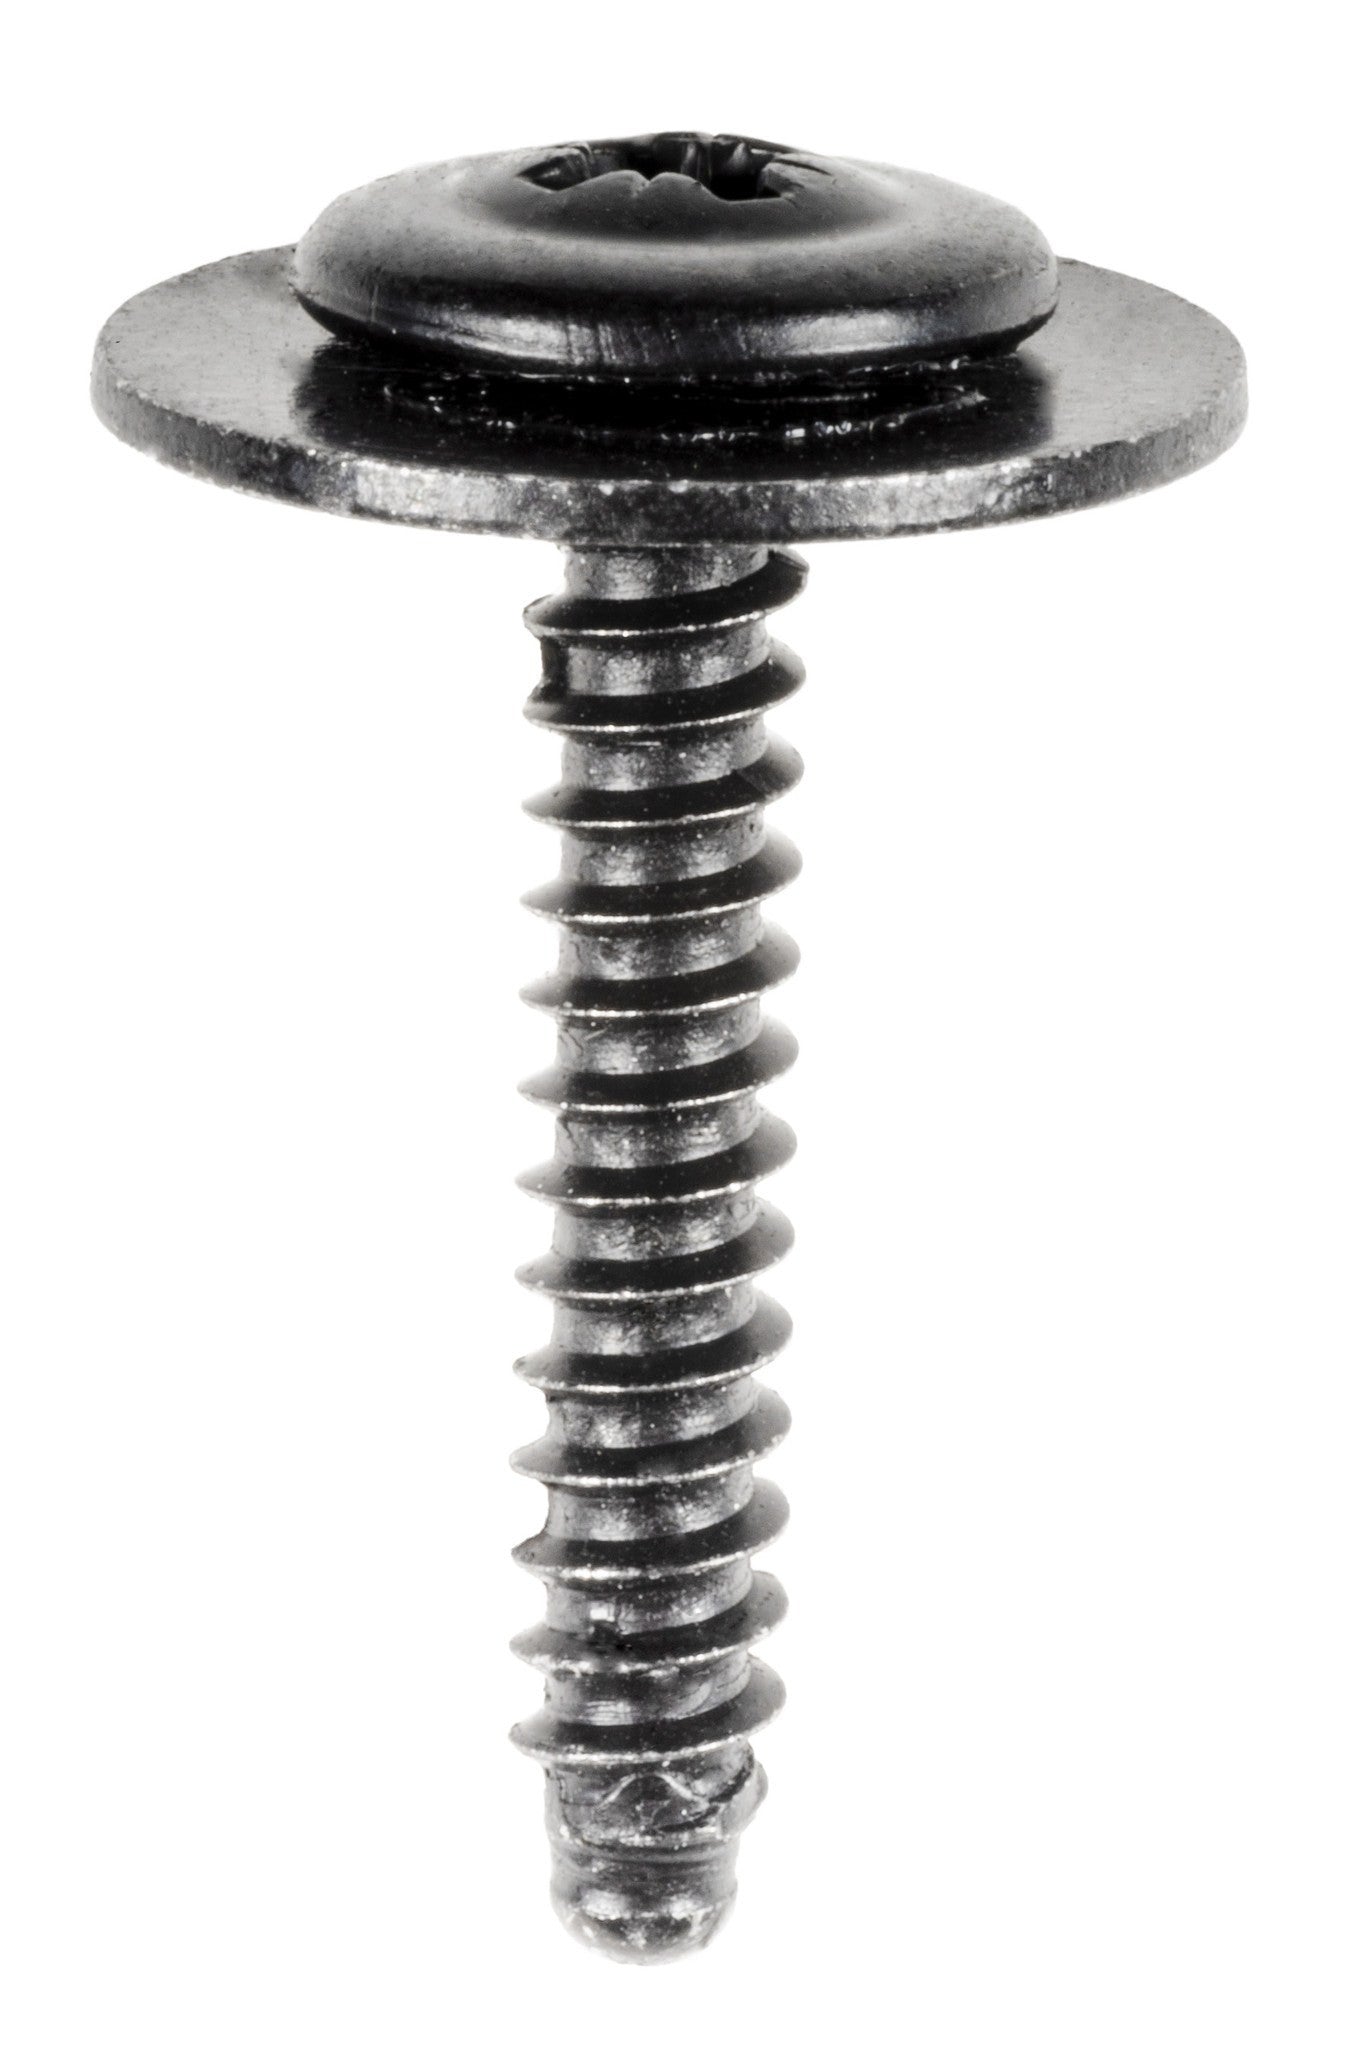 Auveco 22081 GM Posi-Drive SEMS Tapping Screw, M4 2-1 41 X 25mm Qty 50 